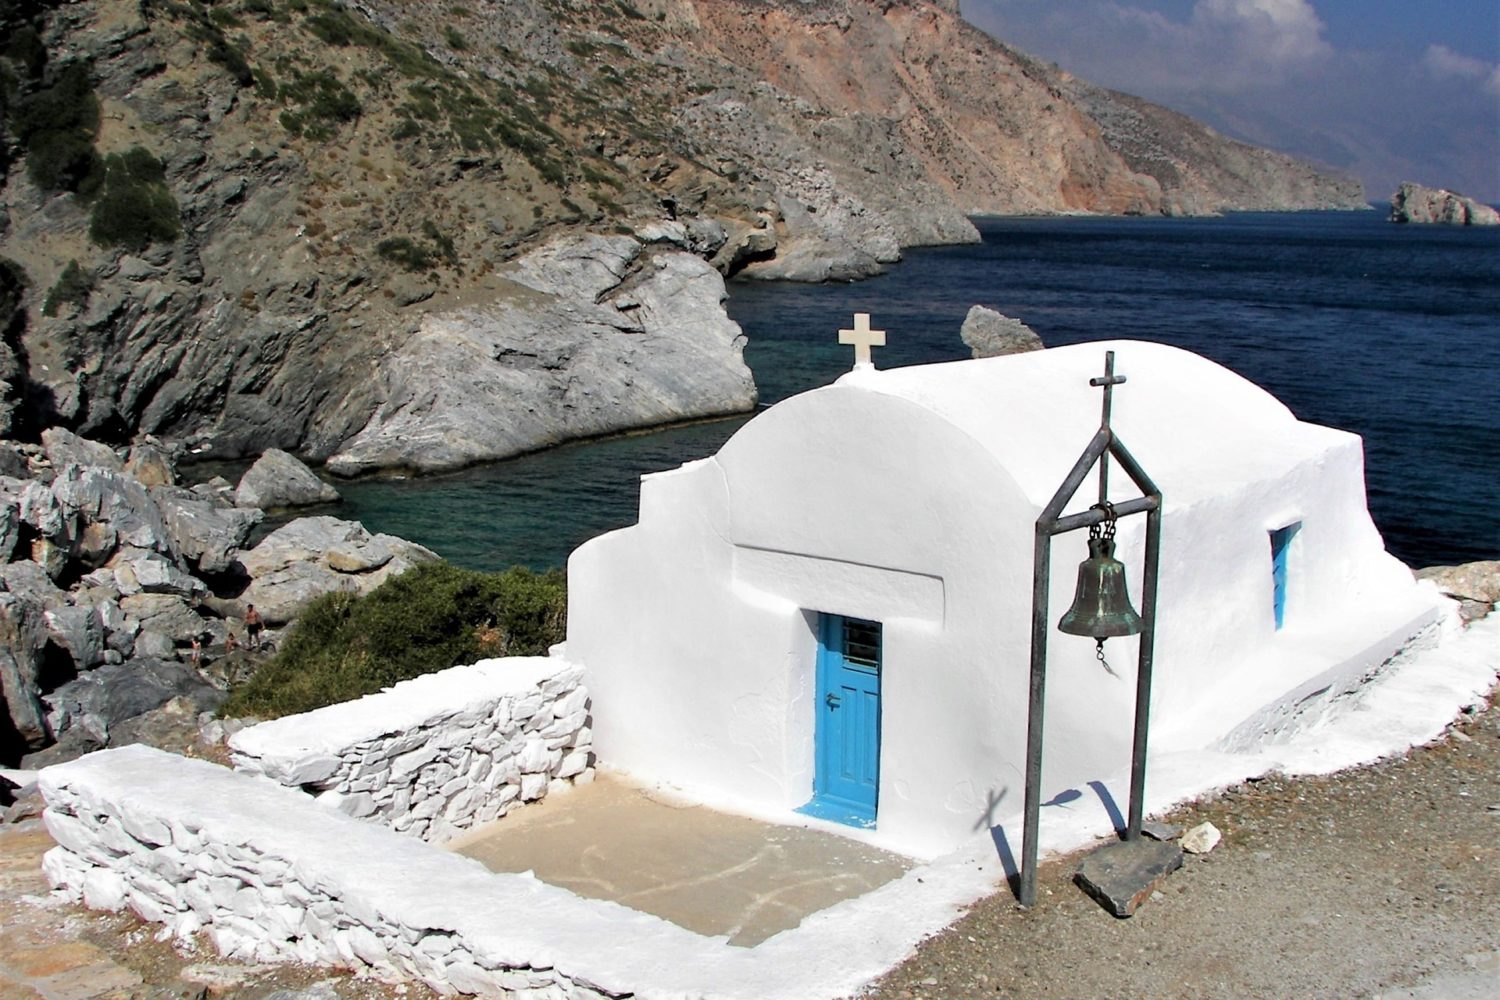 Amorgos has many old churches and monasteries to visit.